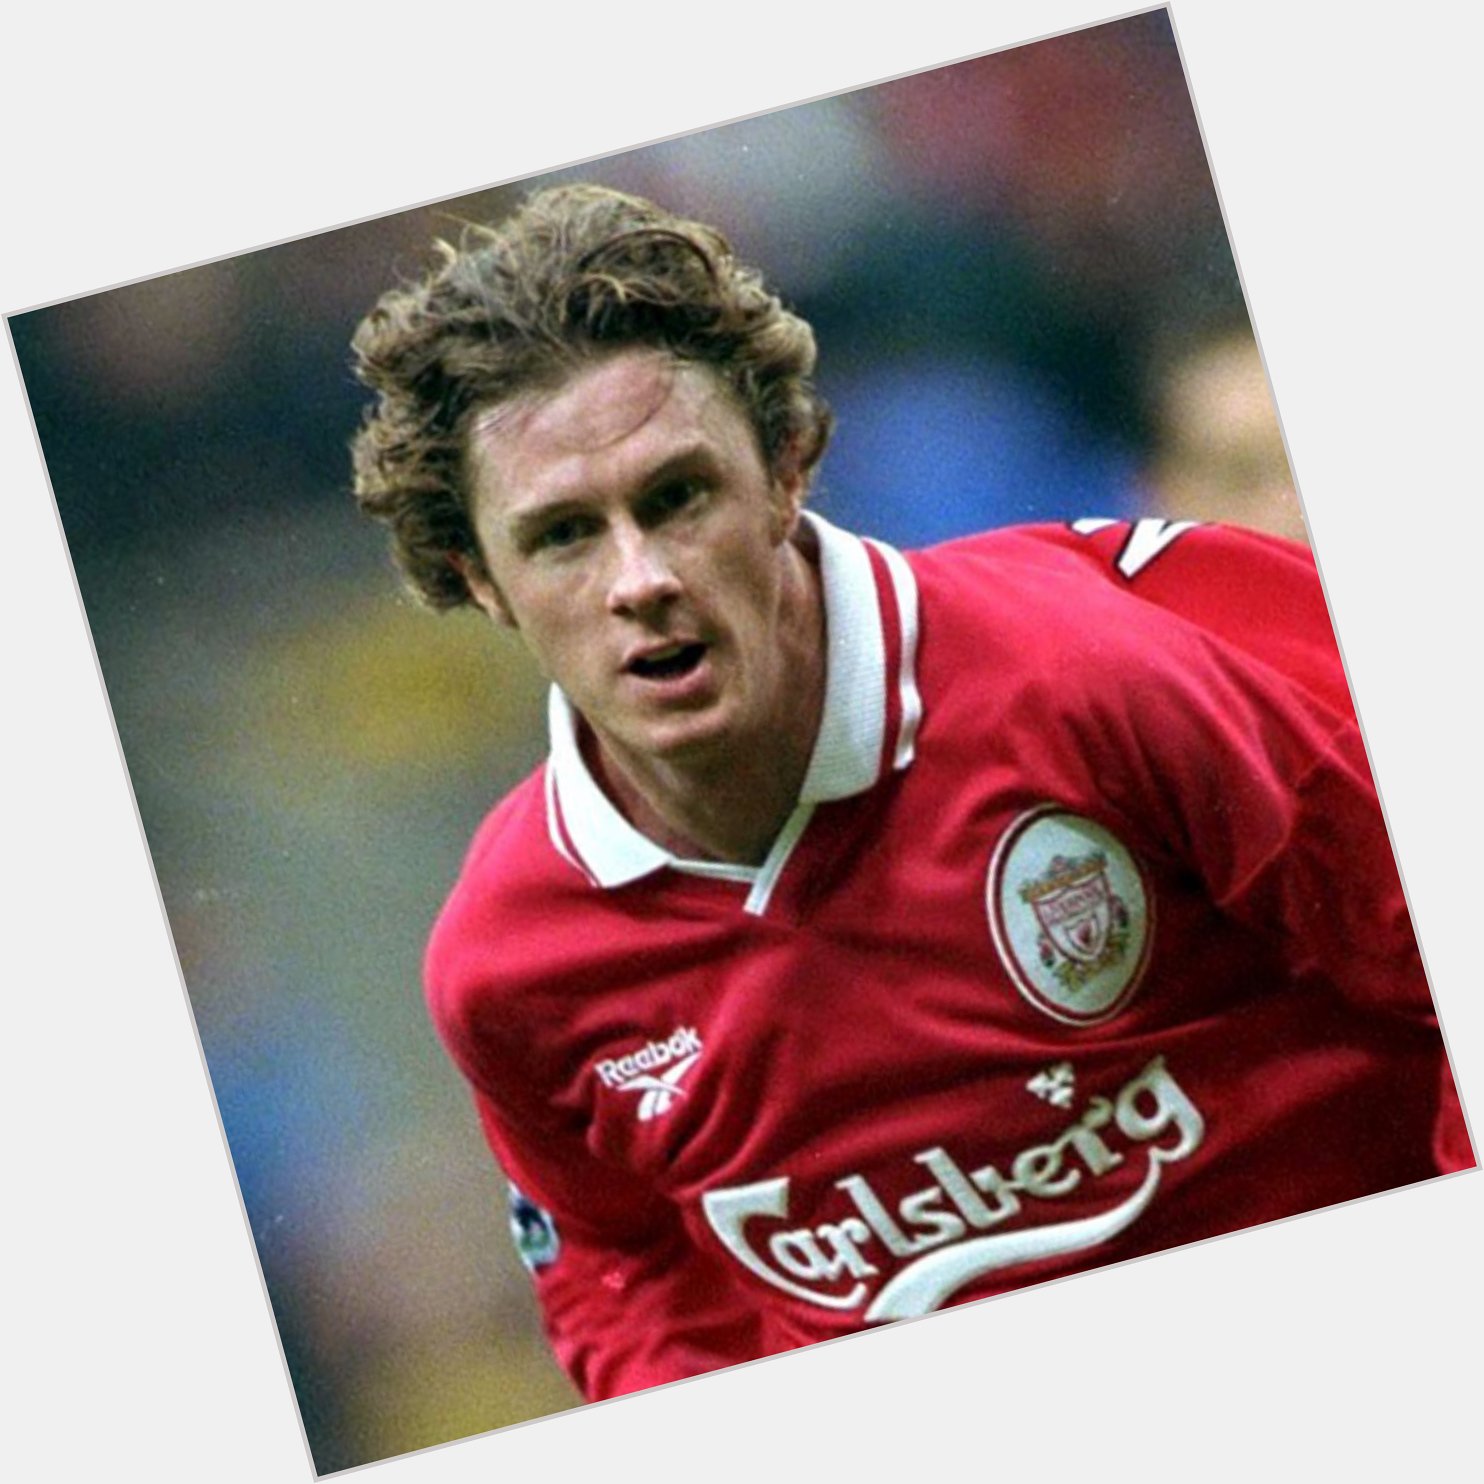 Happy birthday to Steve McManaman, the player who first got me into supporting Liverpool. 